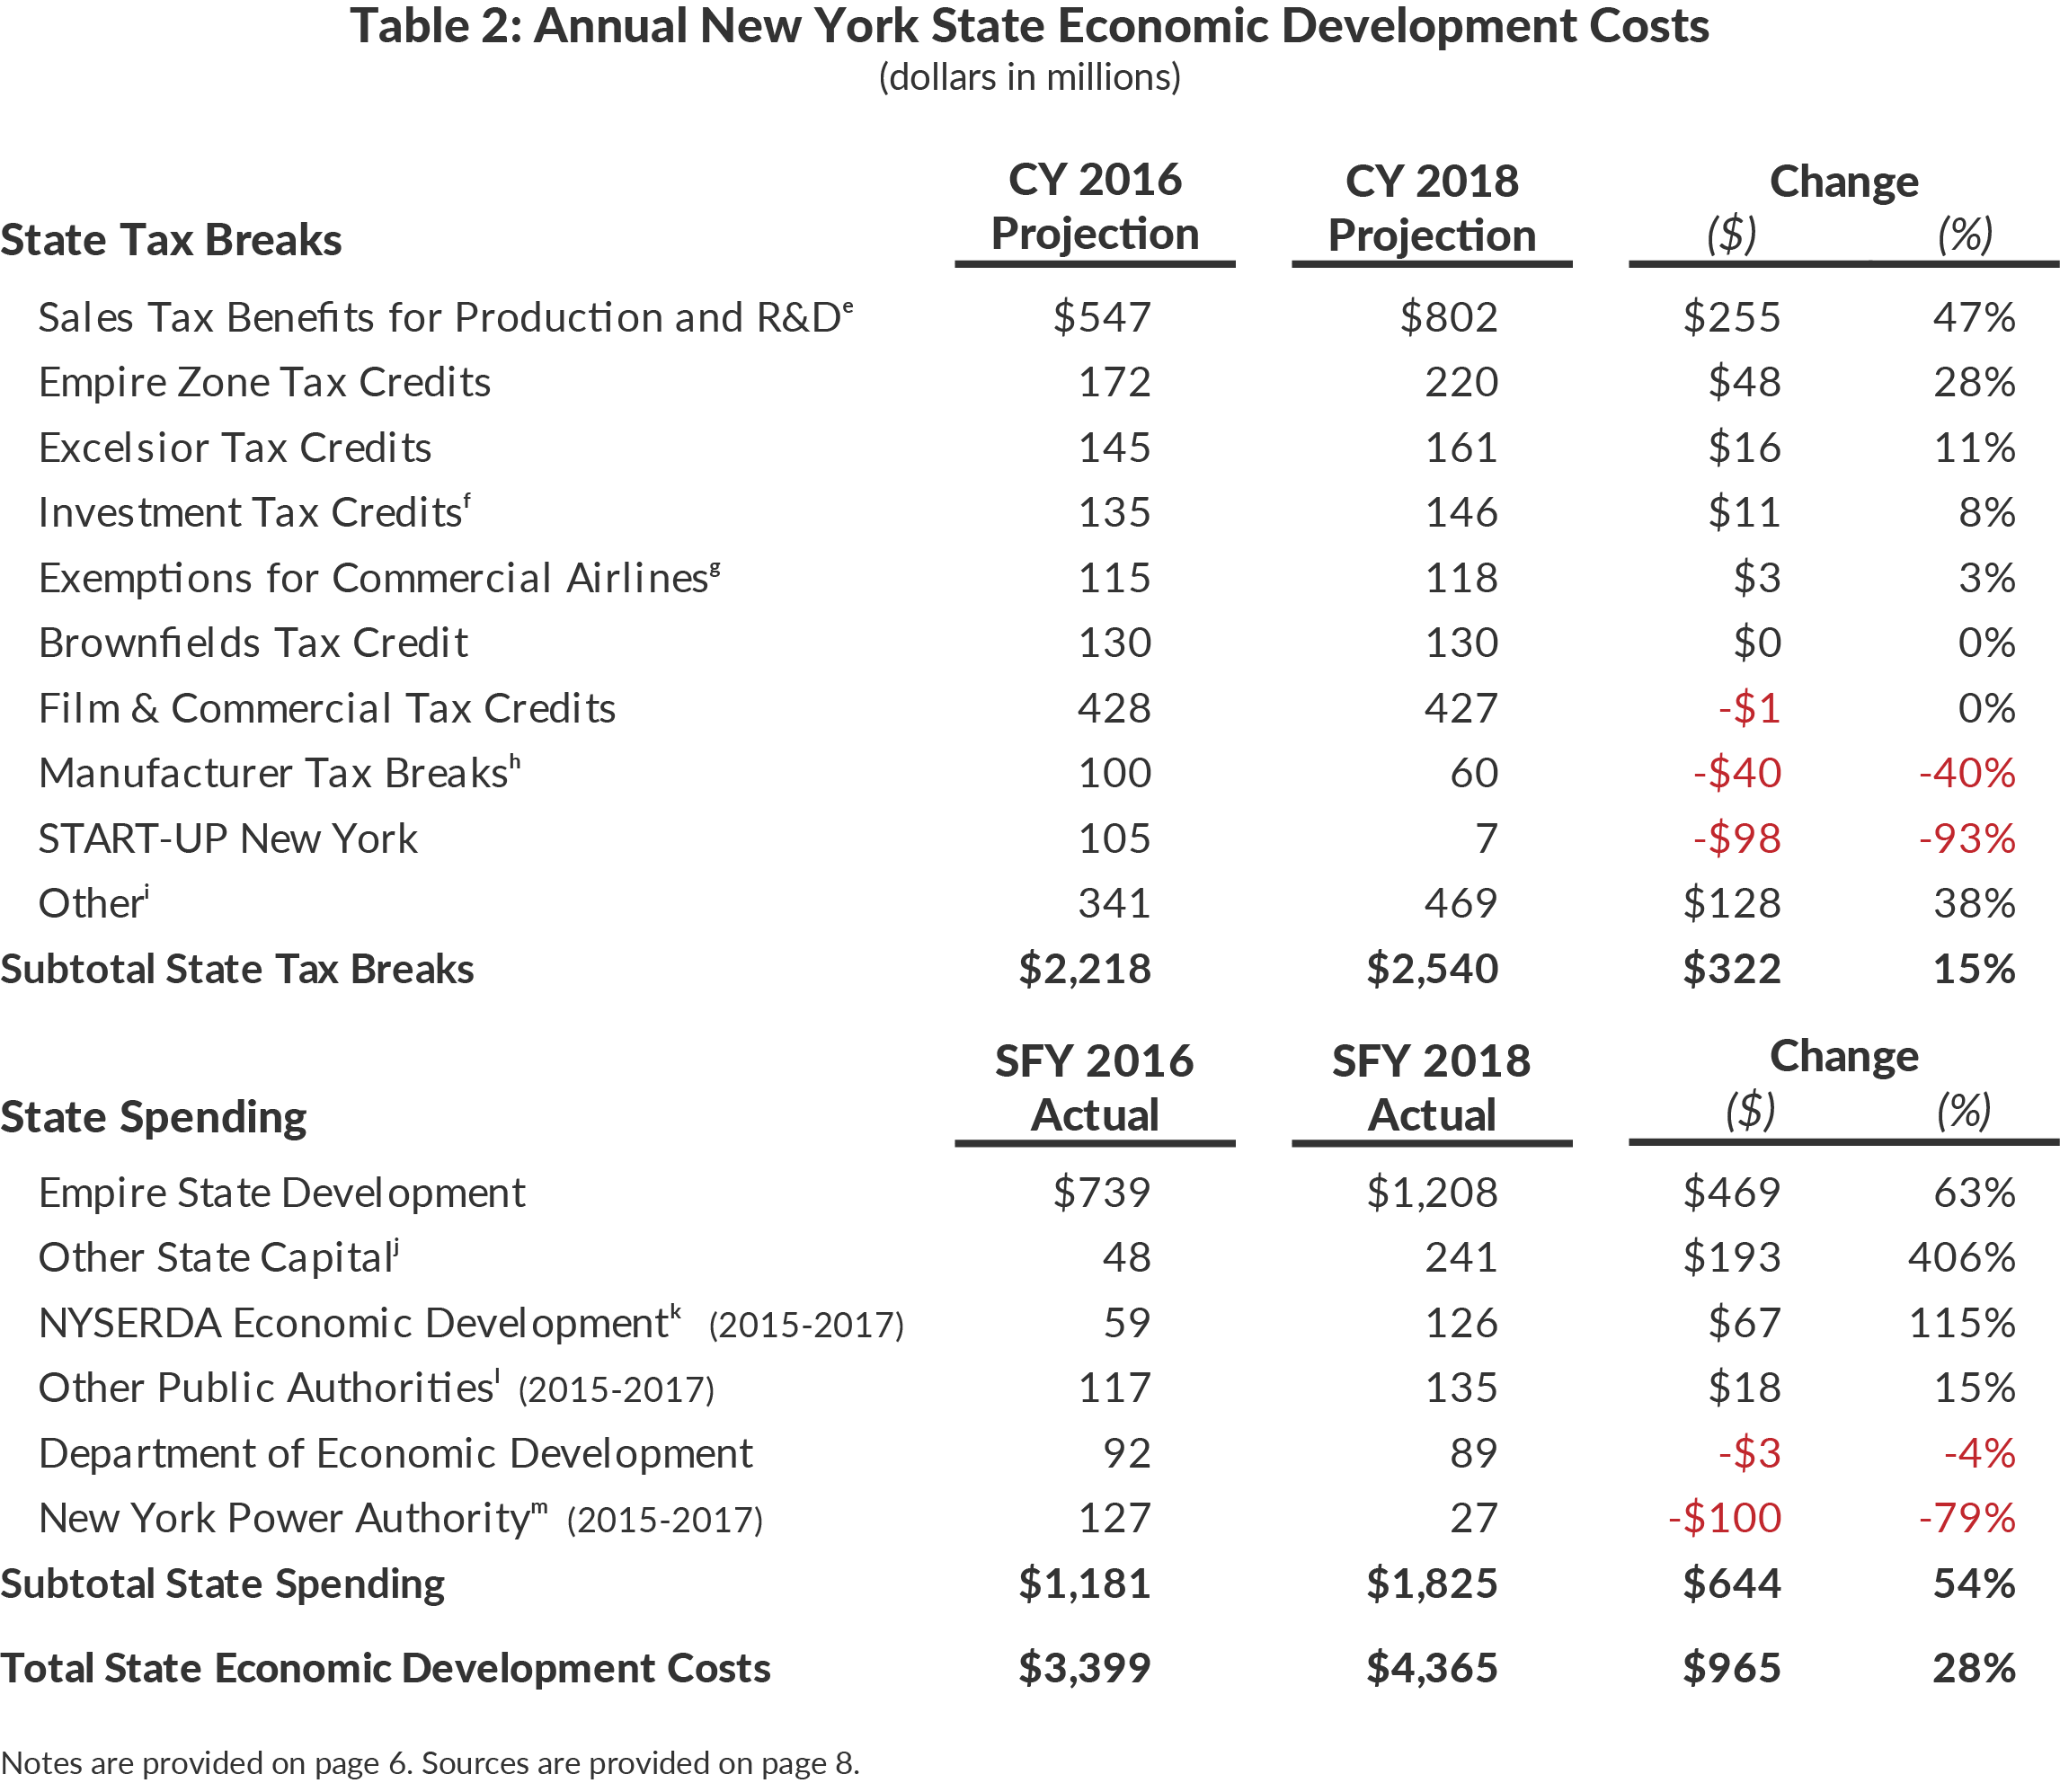 Table 2: Annual New York State Economic Development Costs